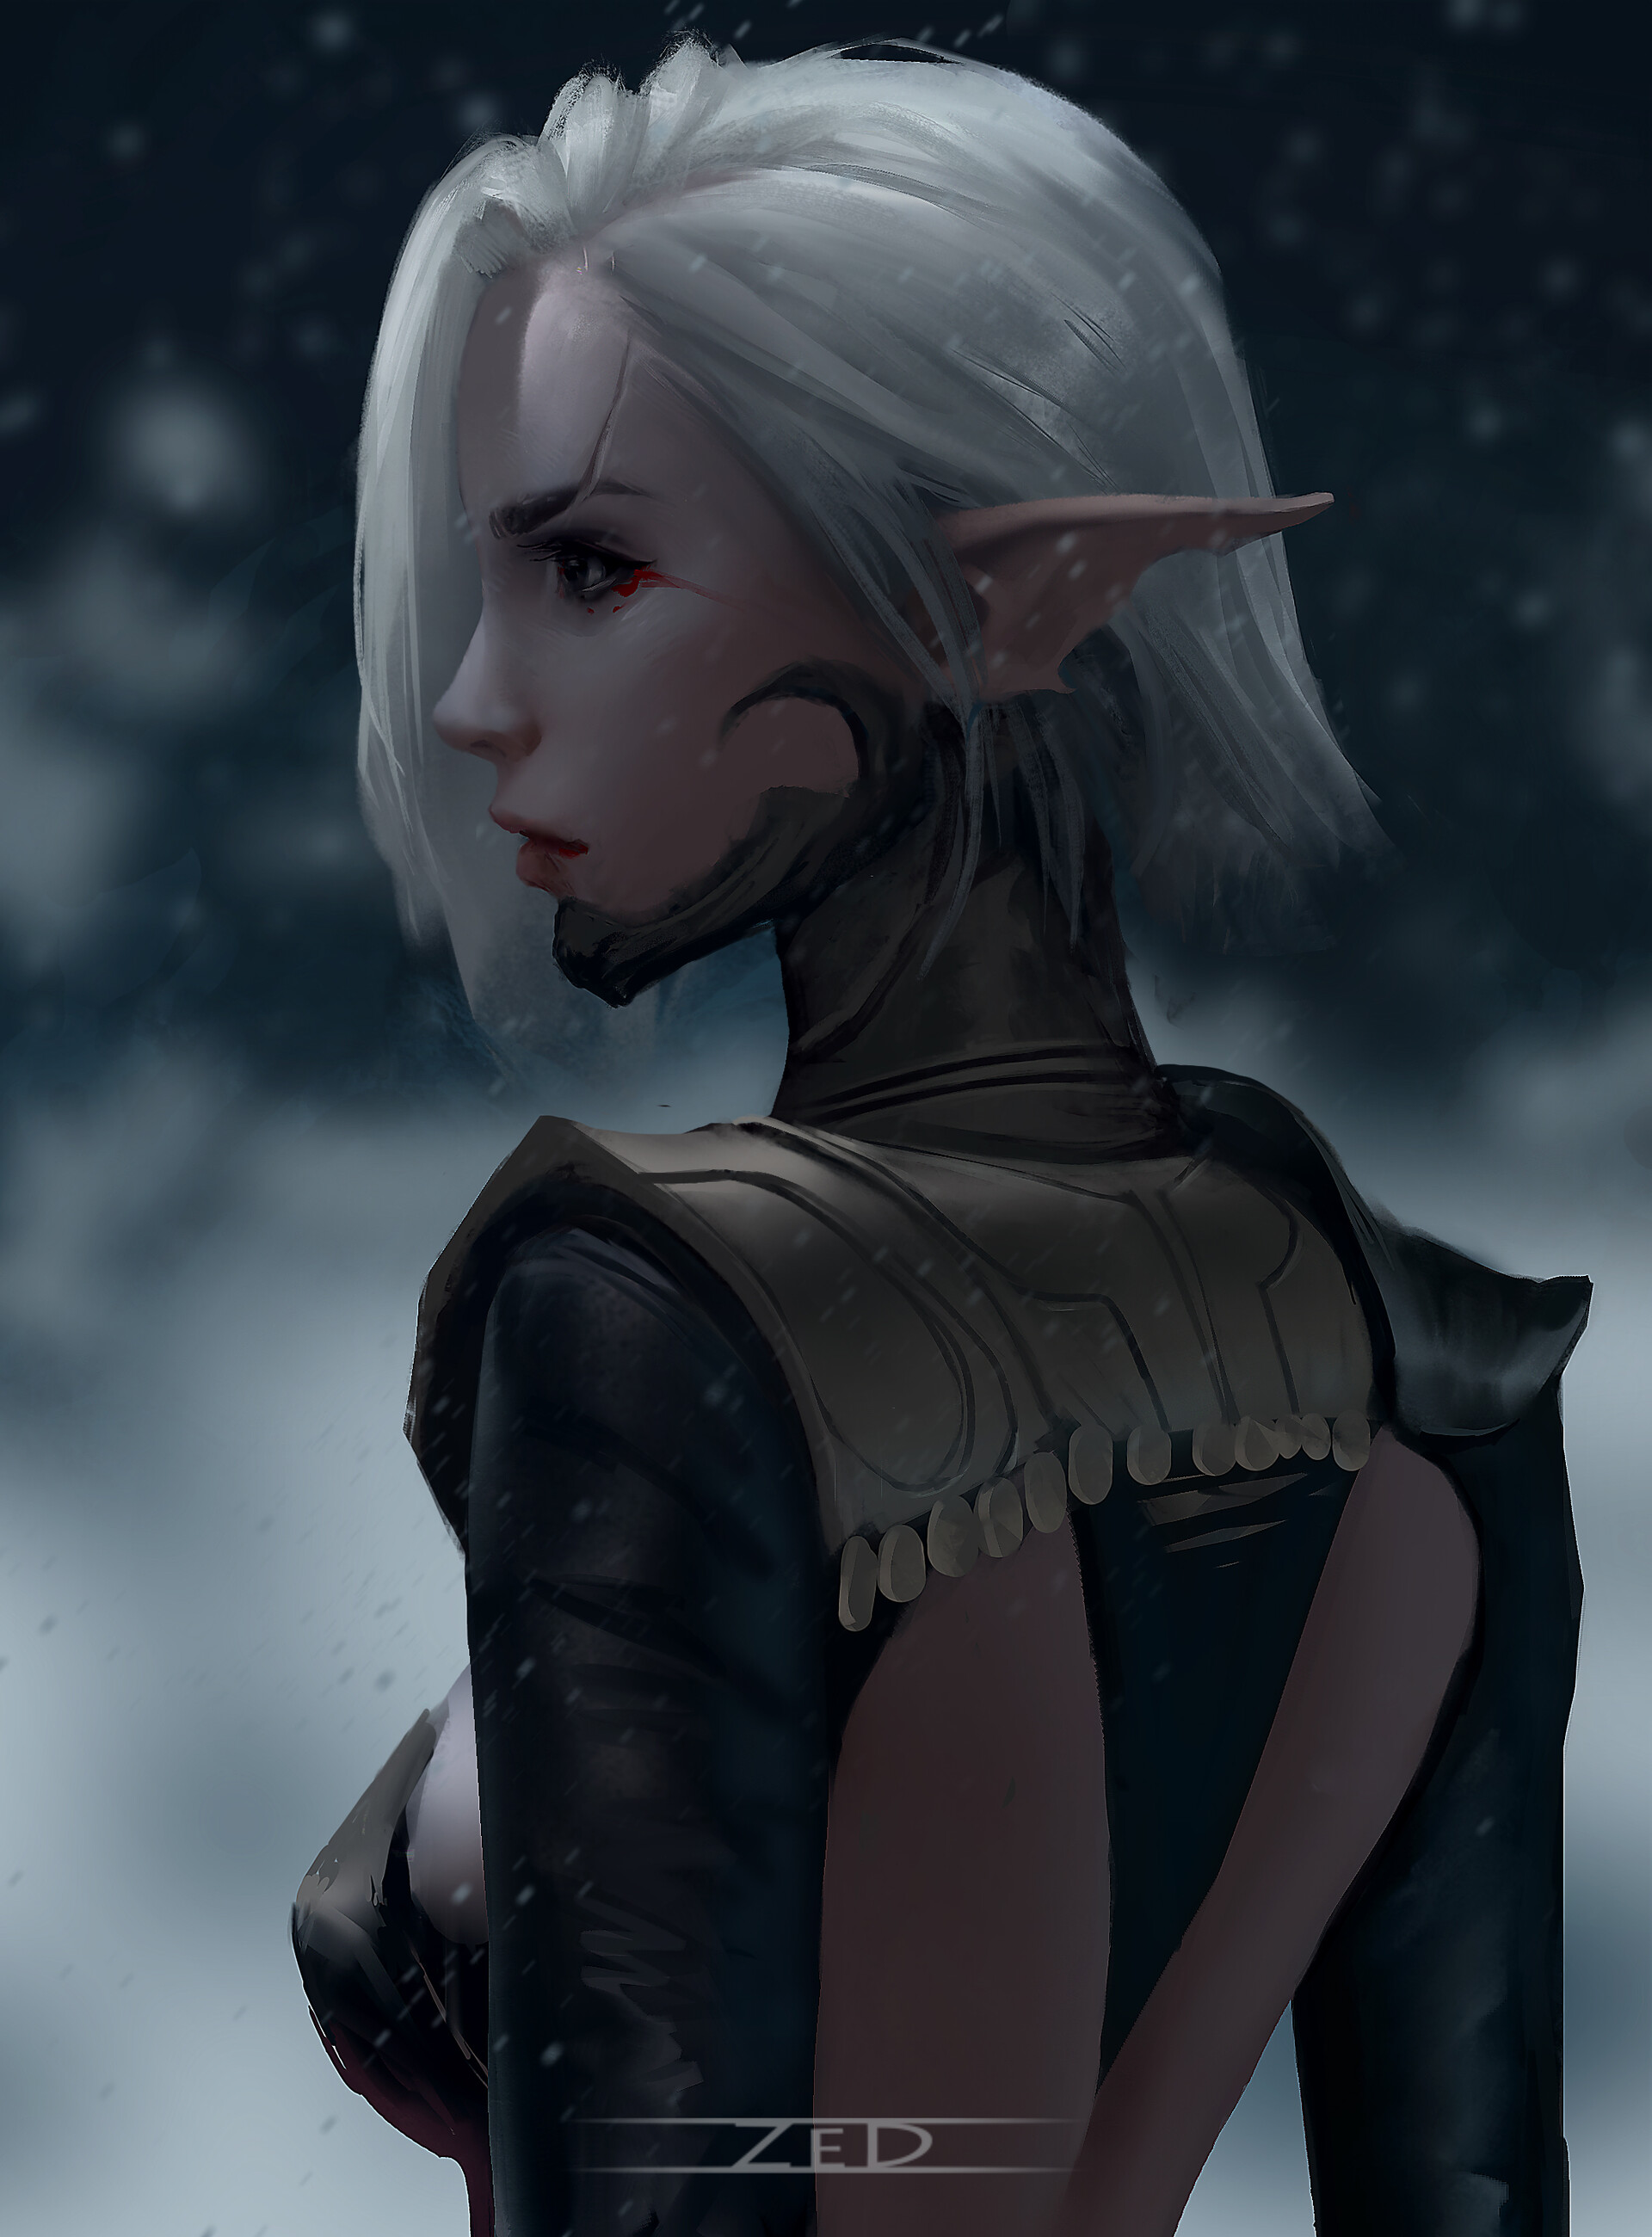 Trungbui Drawing Women Silver Hair Elves Face Paint Black Clothing Looking Away Profile Snow Snowing 1920x2600